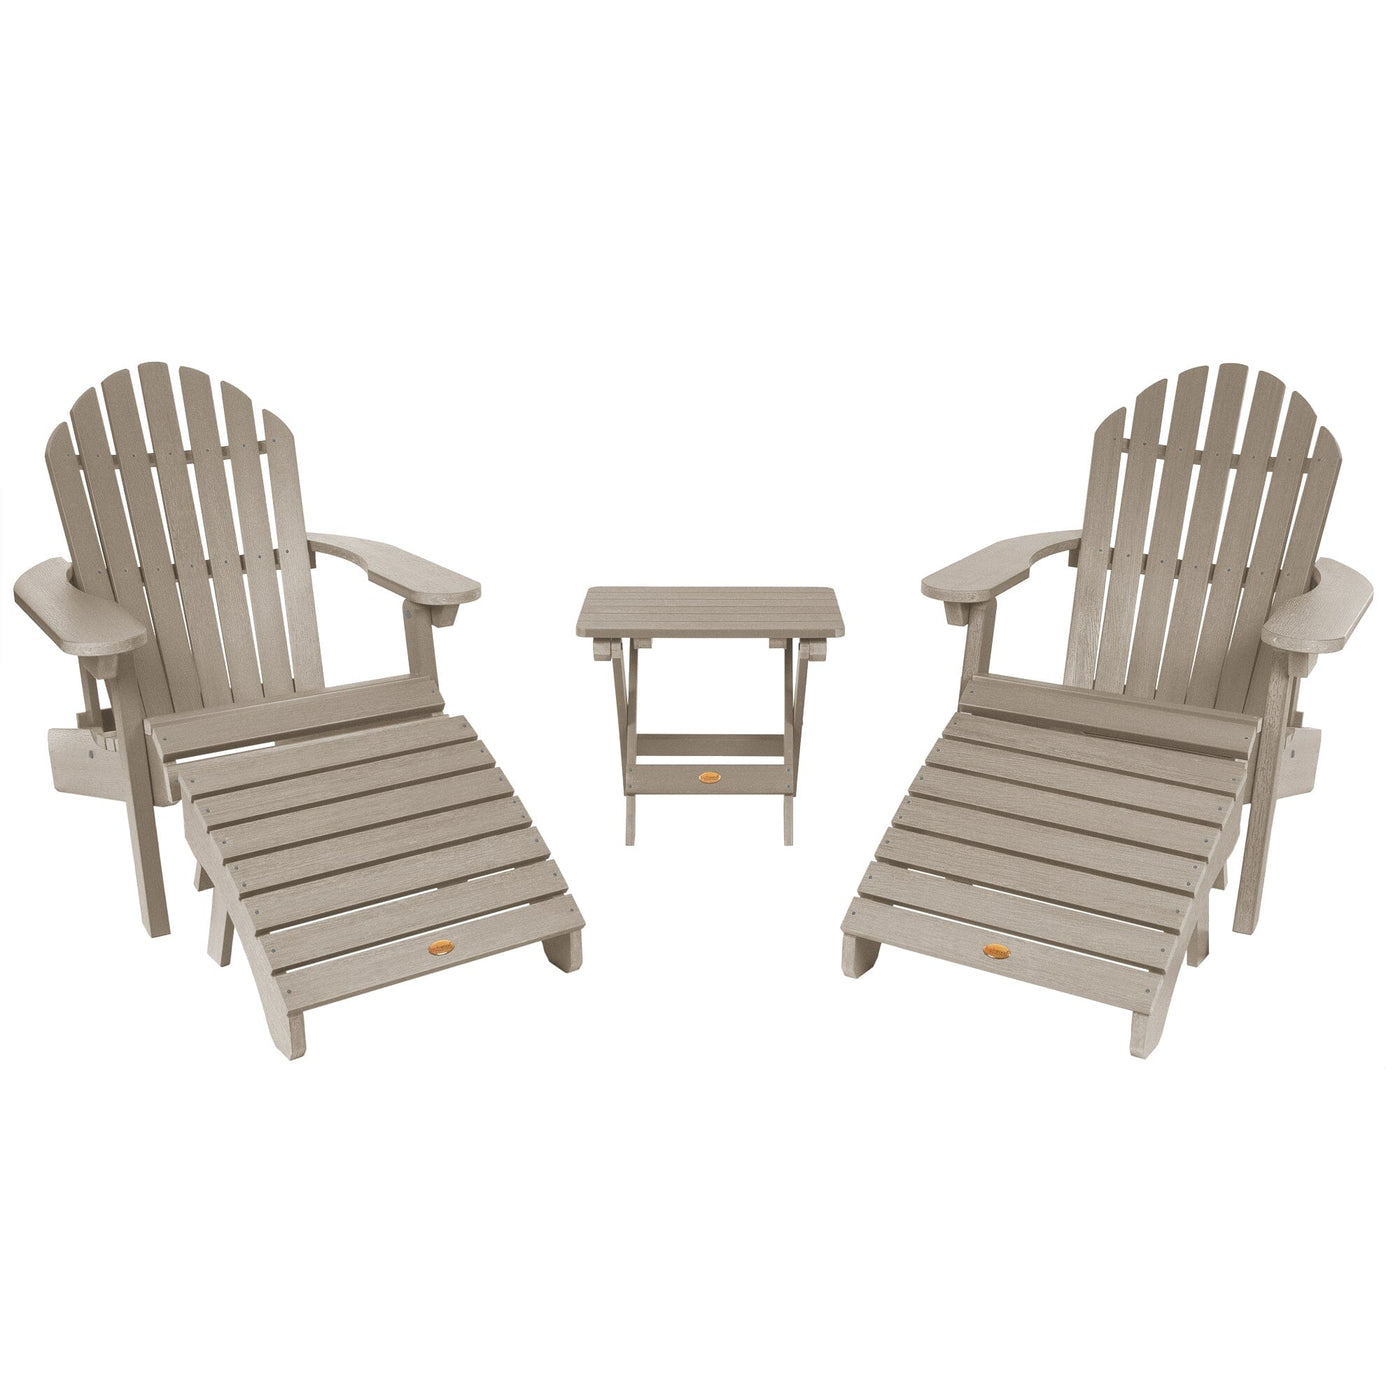 2 Hamilton Folding & Reclining Adirondack Chairs, 2 Ottomans & 1 Folding Side Table Kitted Sets Highwood USA Woodland Brown 